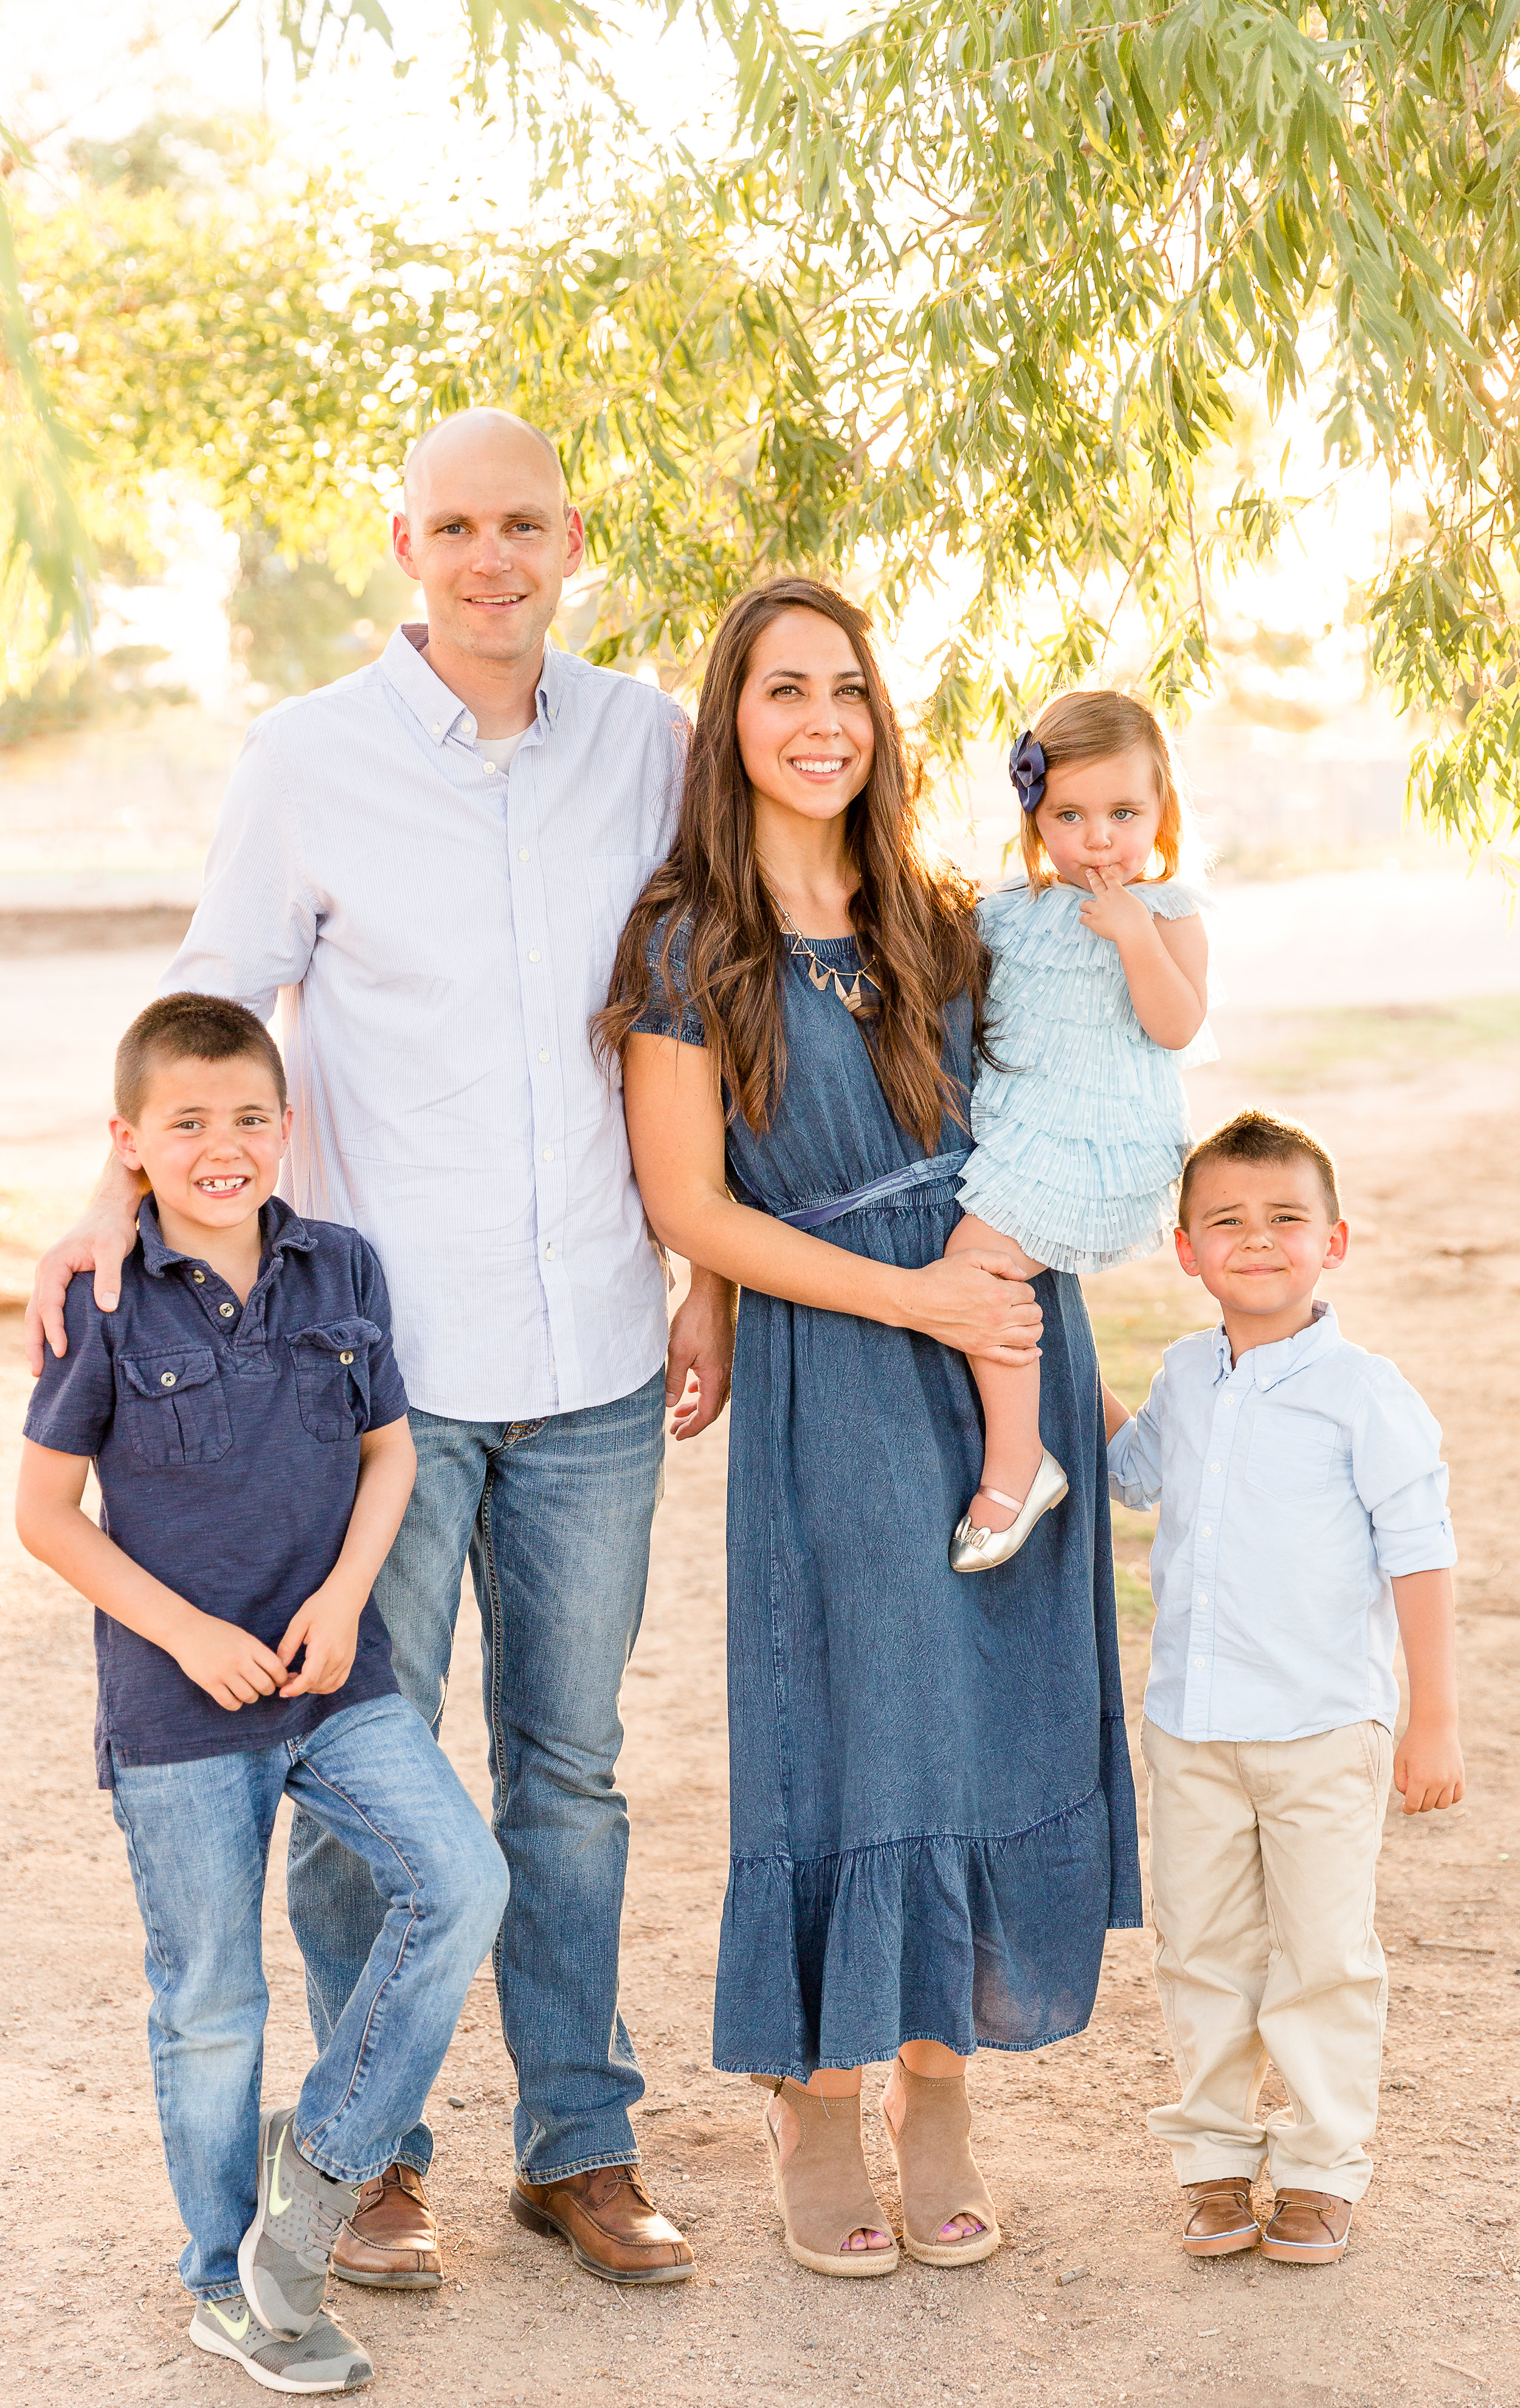 Family Session at Christopher Columbus Park in Tucson Arizona by portrait and wedding photographer Melissa Fritzsche Photography